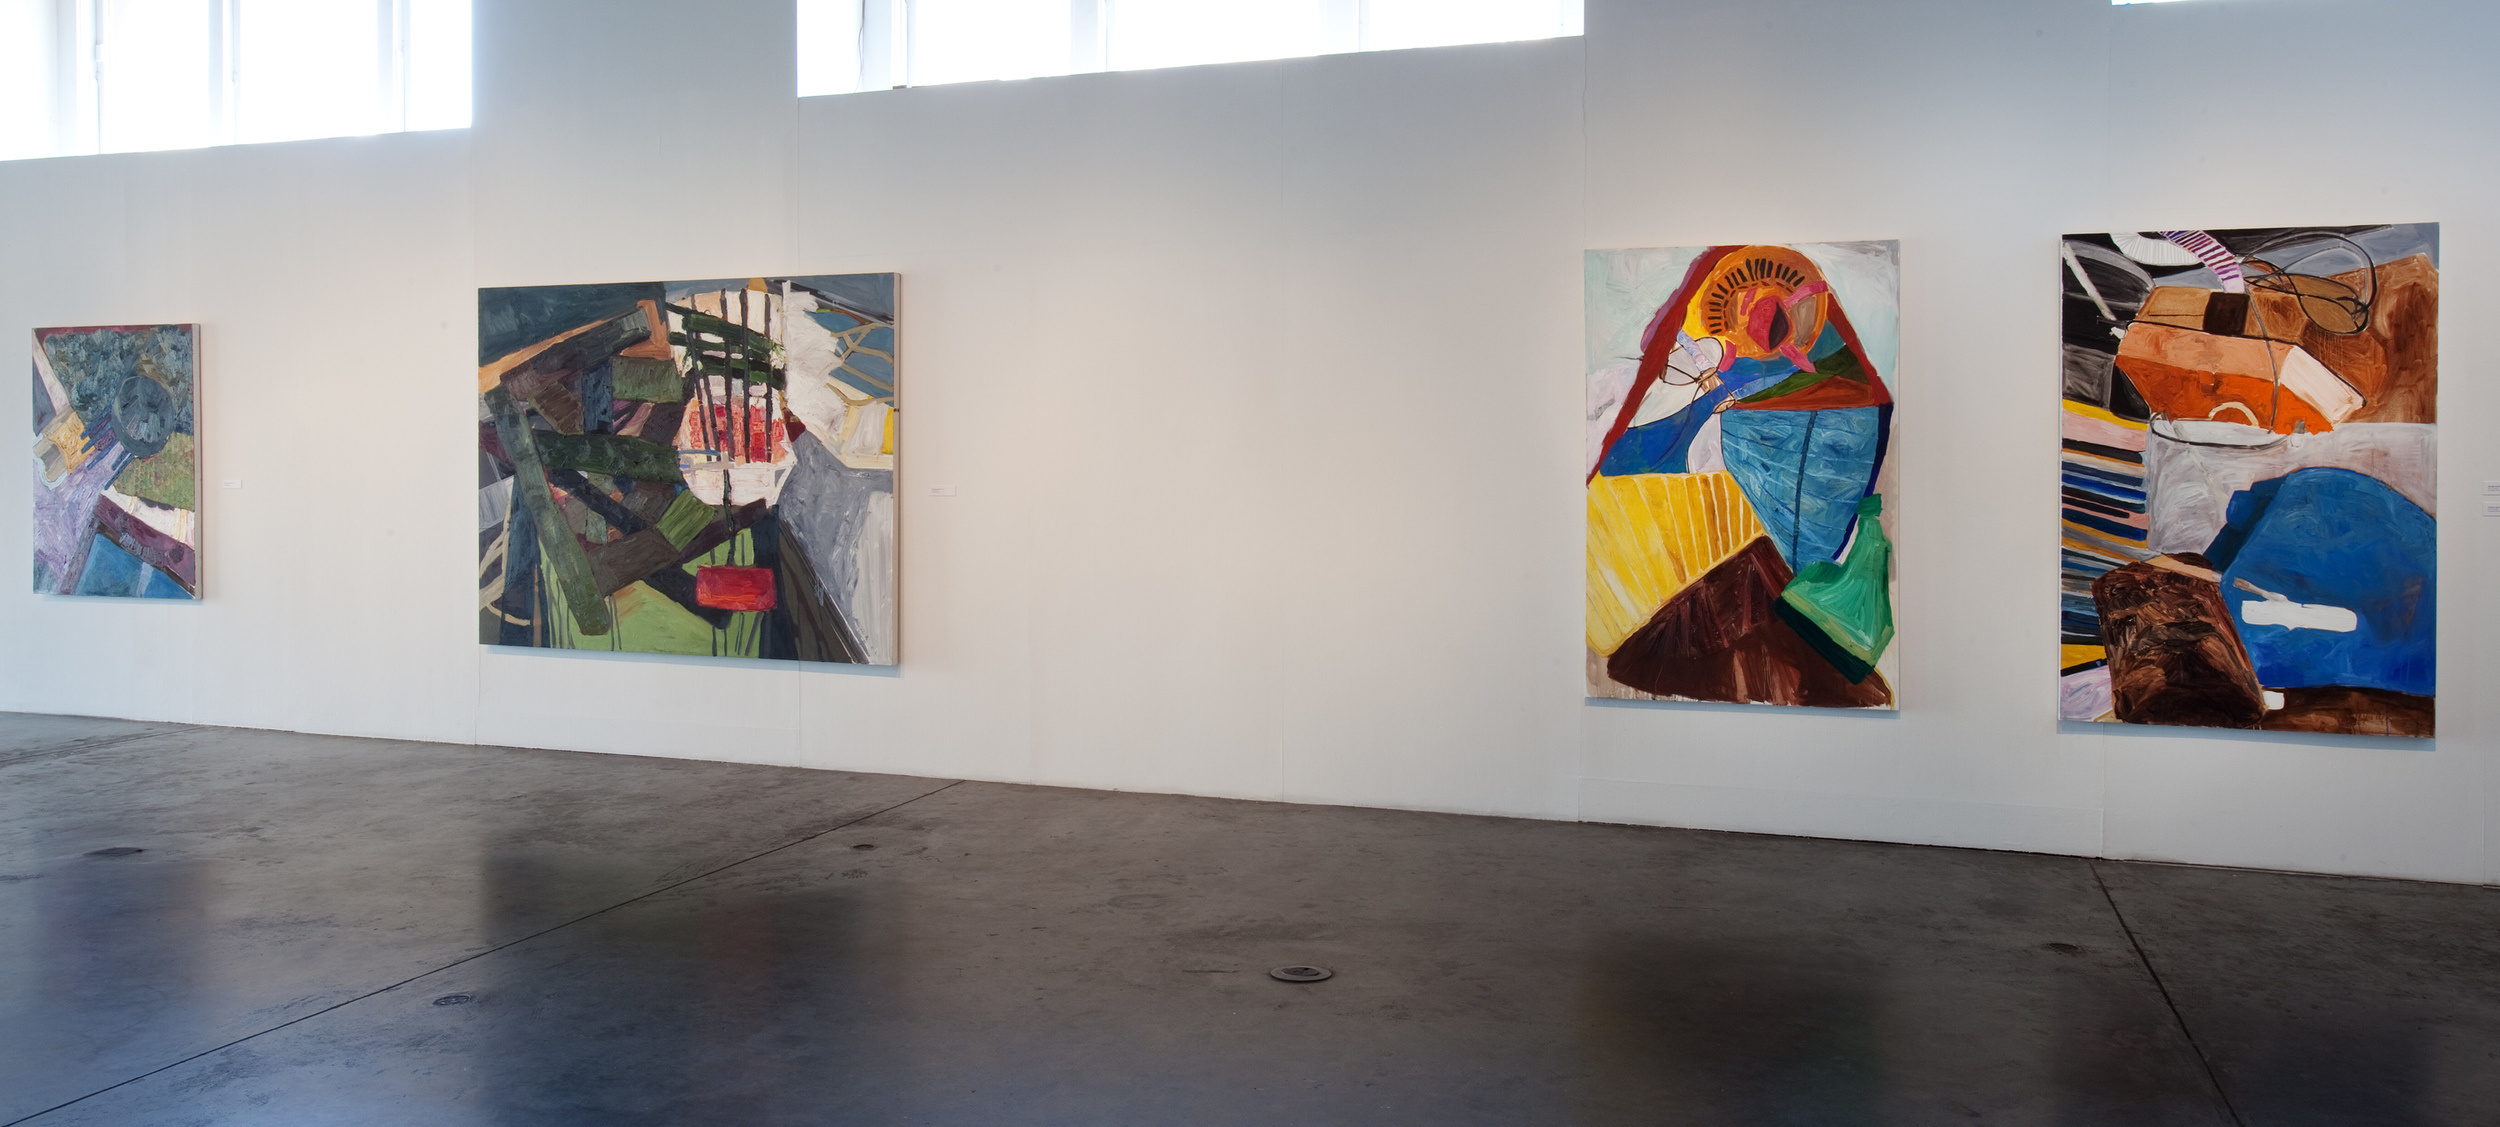 The Center Cannot Hold: Paintings and Drawings by Brooke Pickett